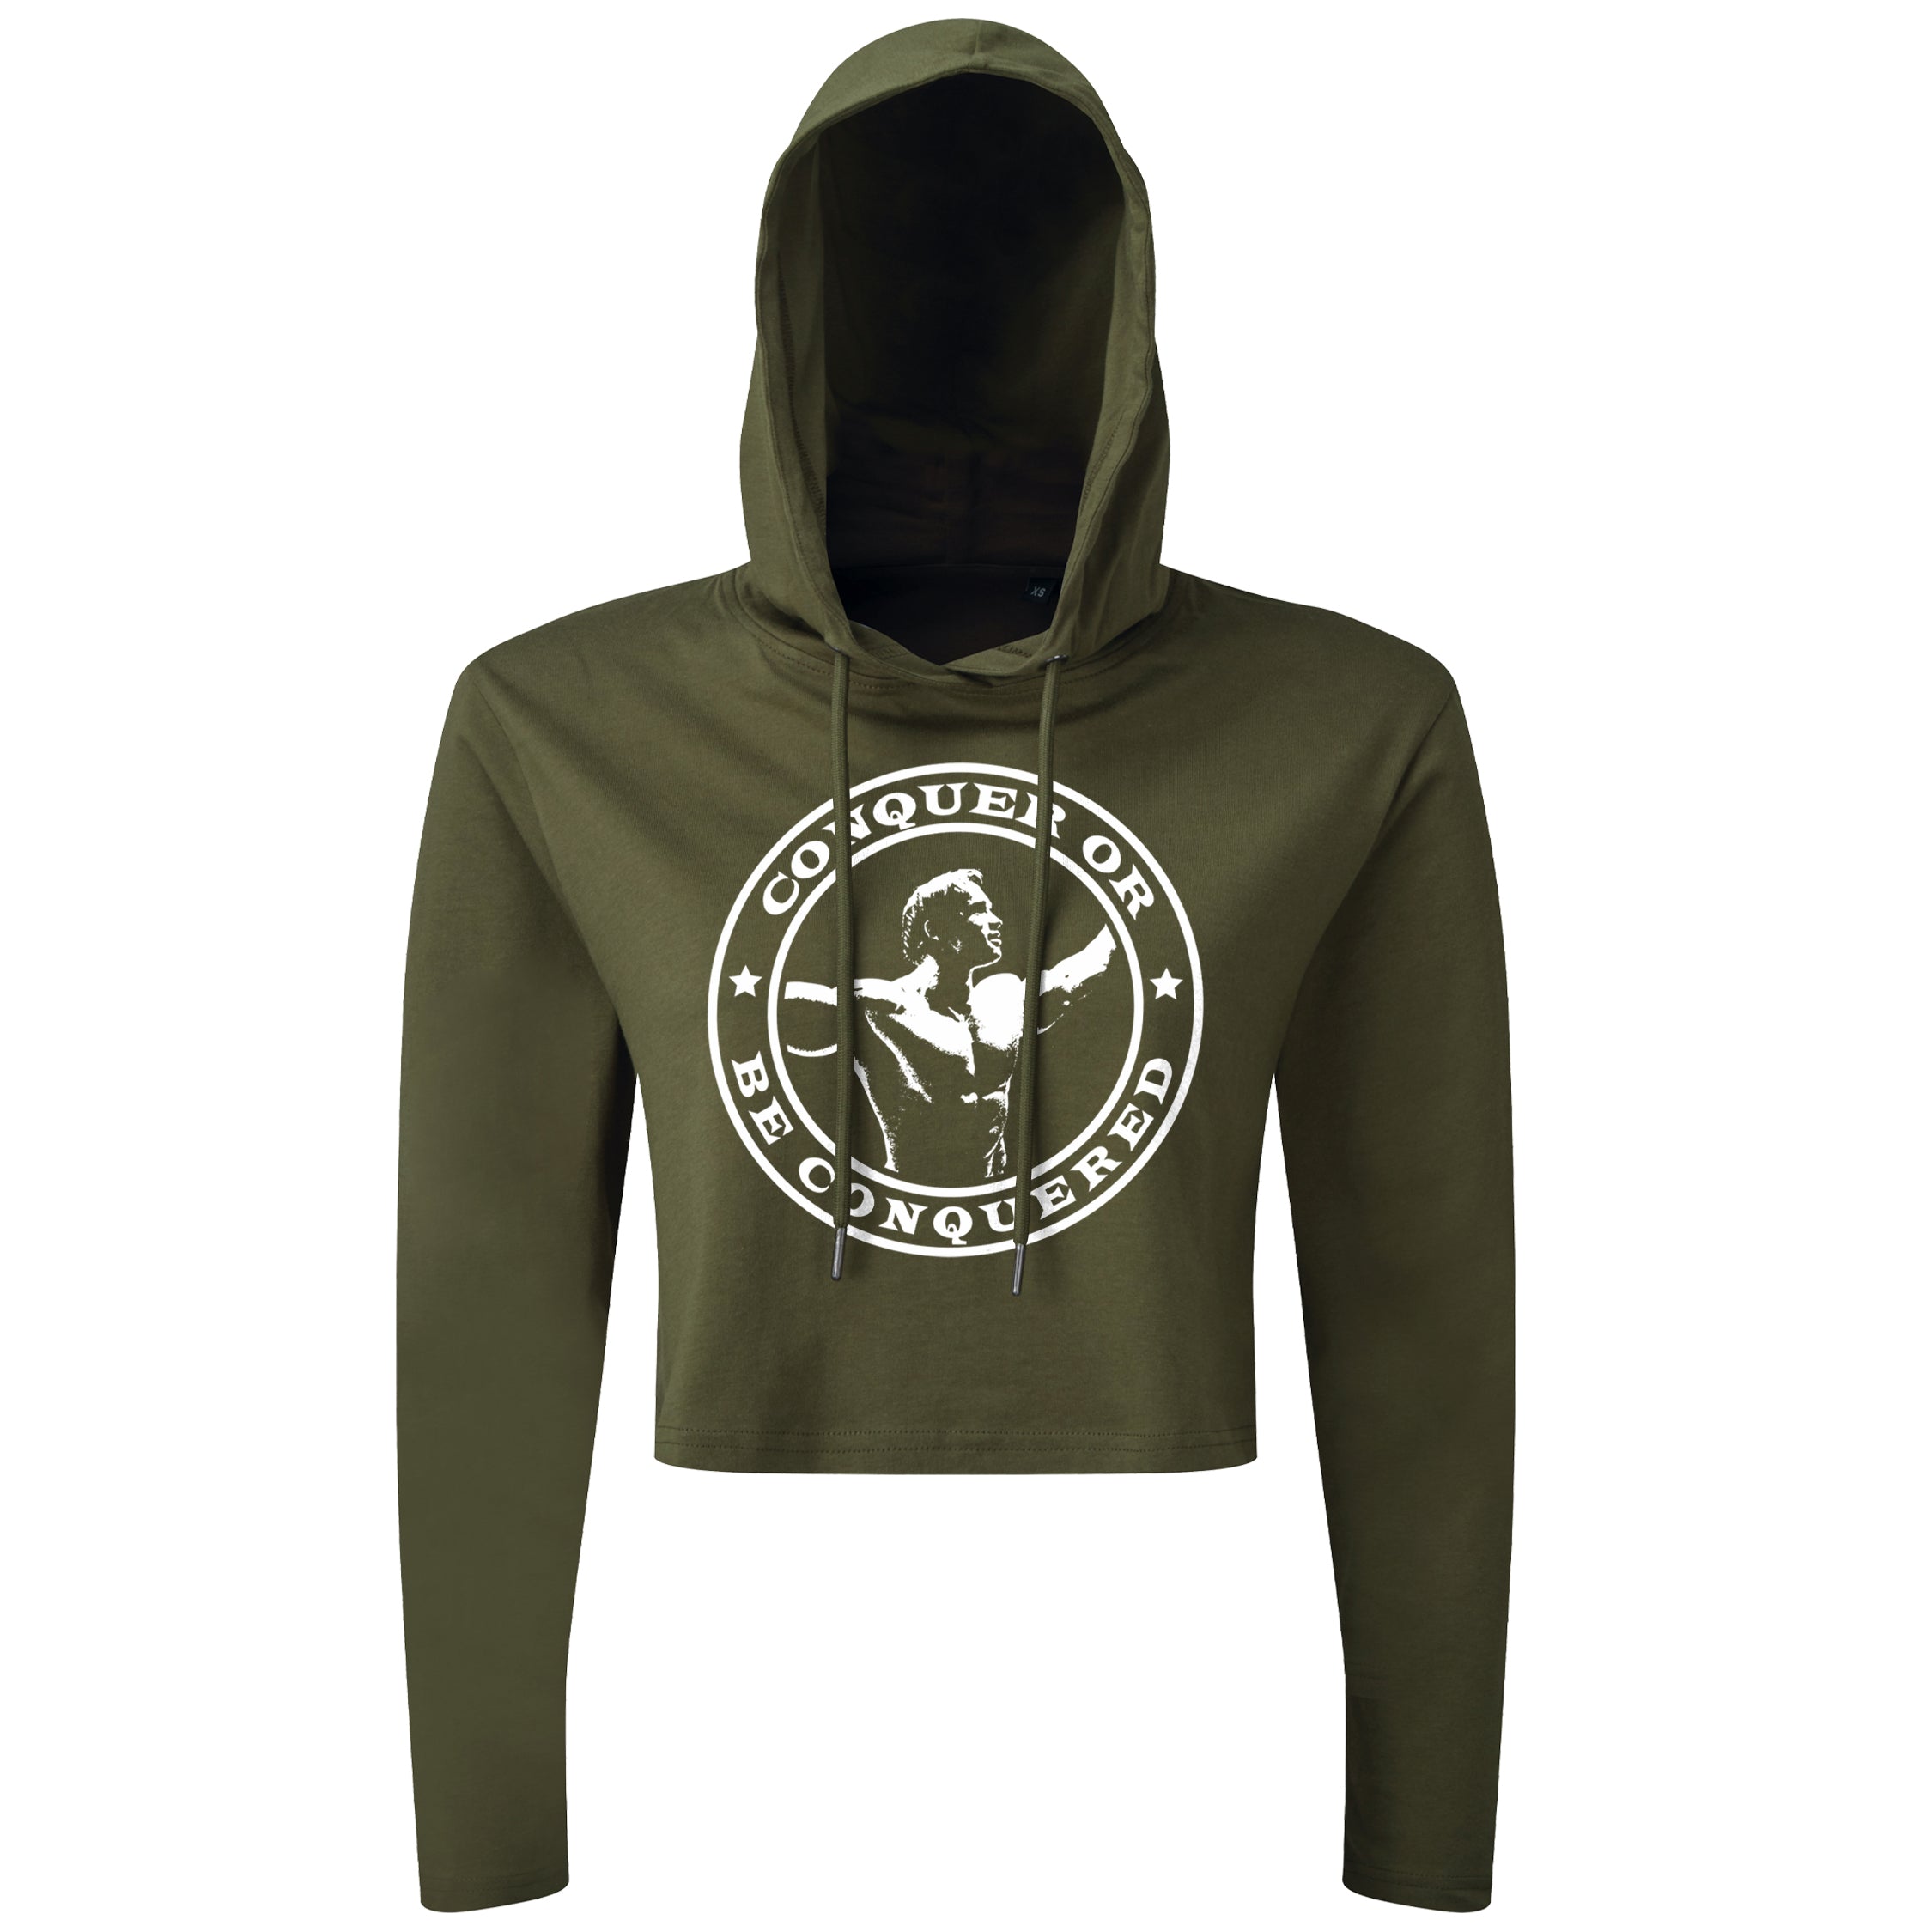 Conquer or be Conquered - Cropped Hoodie